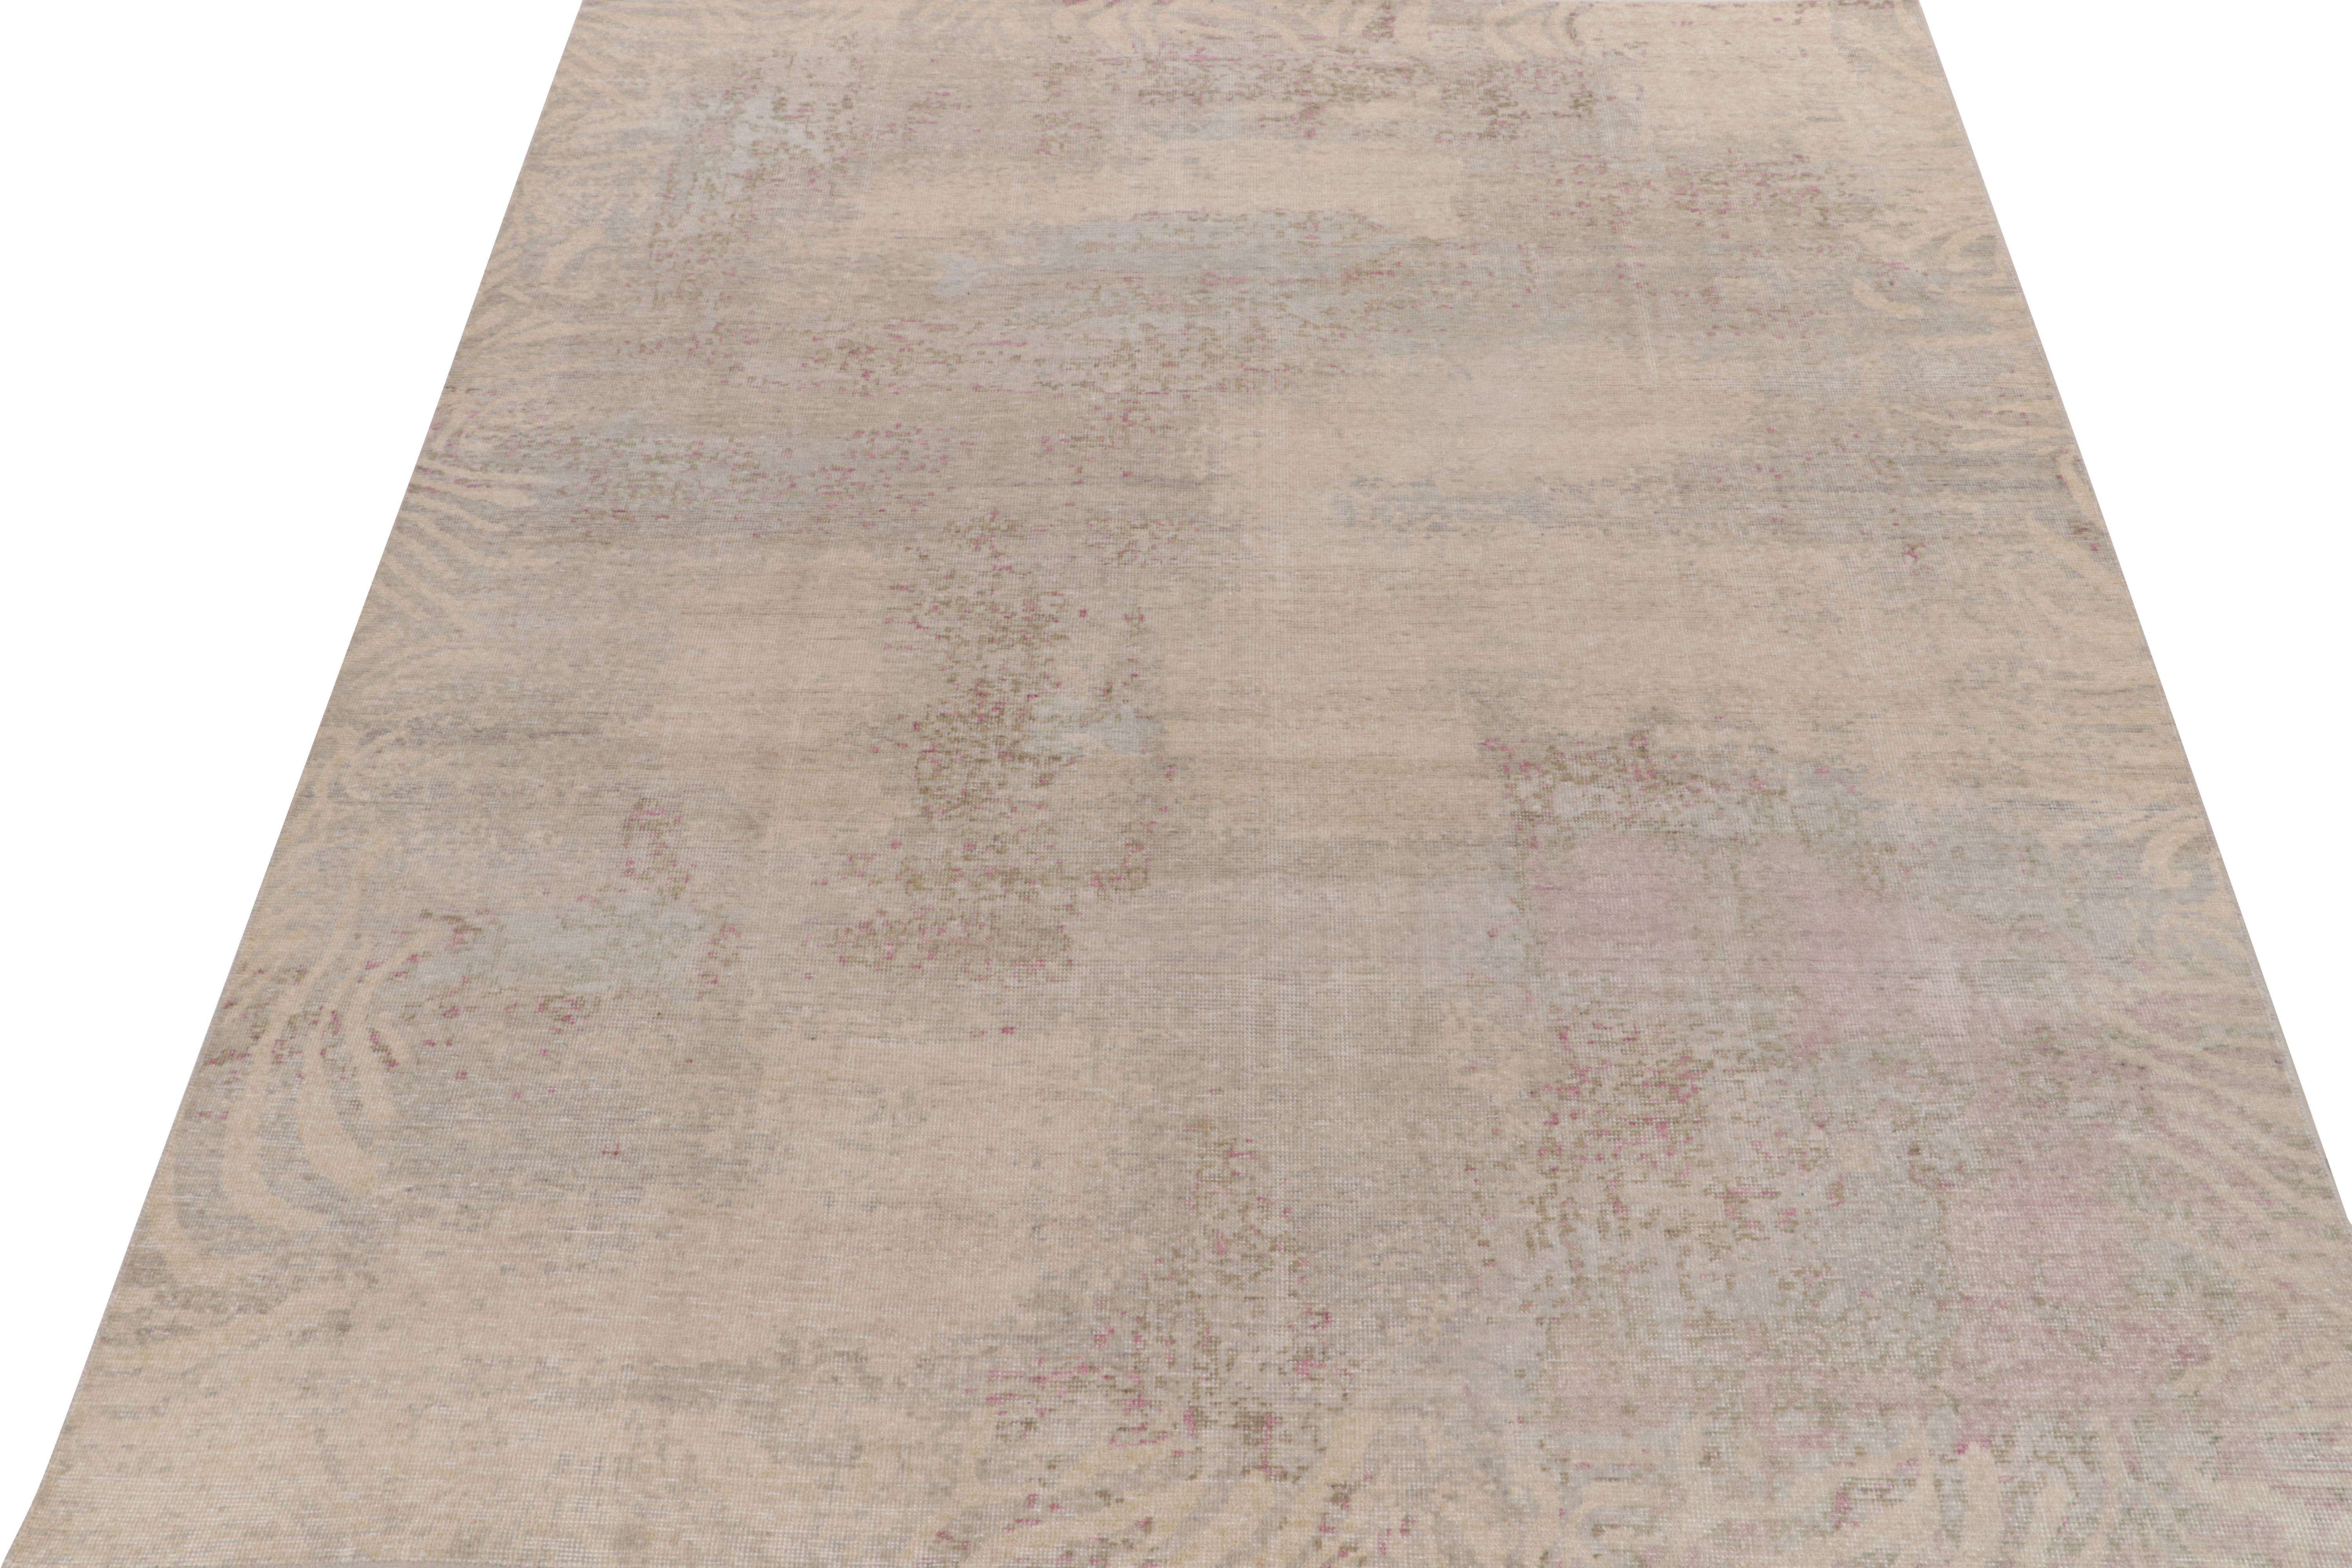 Indian Rug & Kilim's Distressed Style Modern Rug in Beige-Brown, Blue Abstract Pattern For Sale